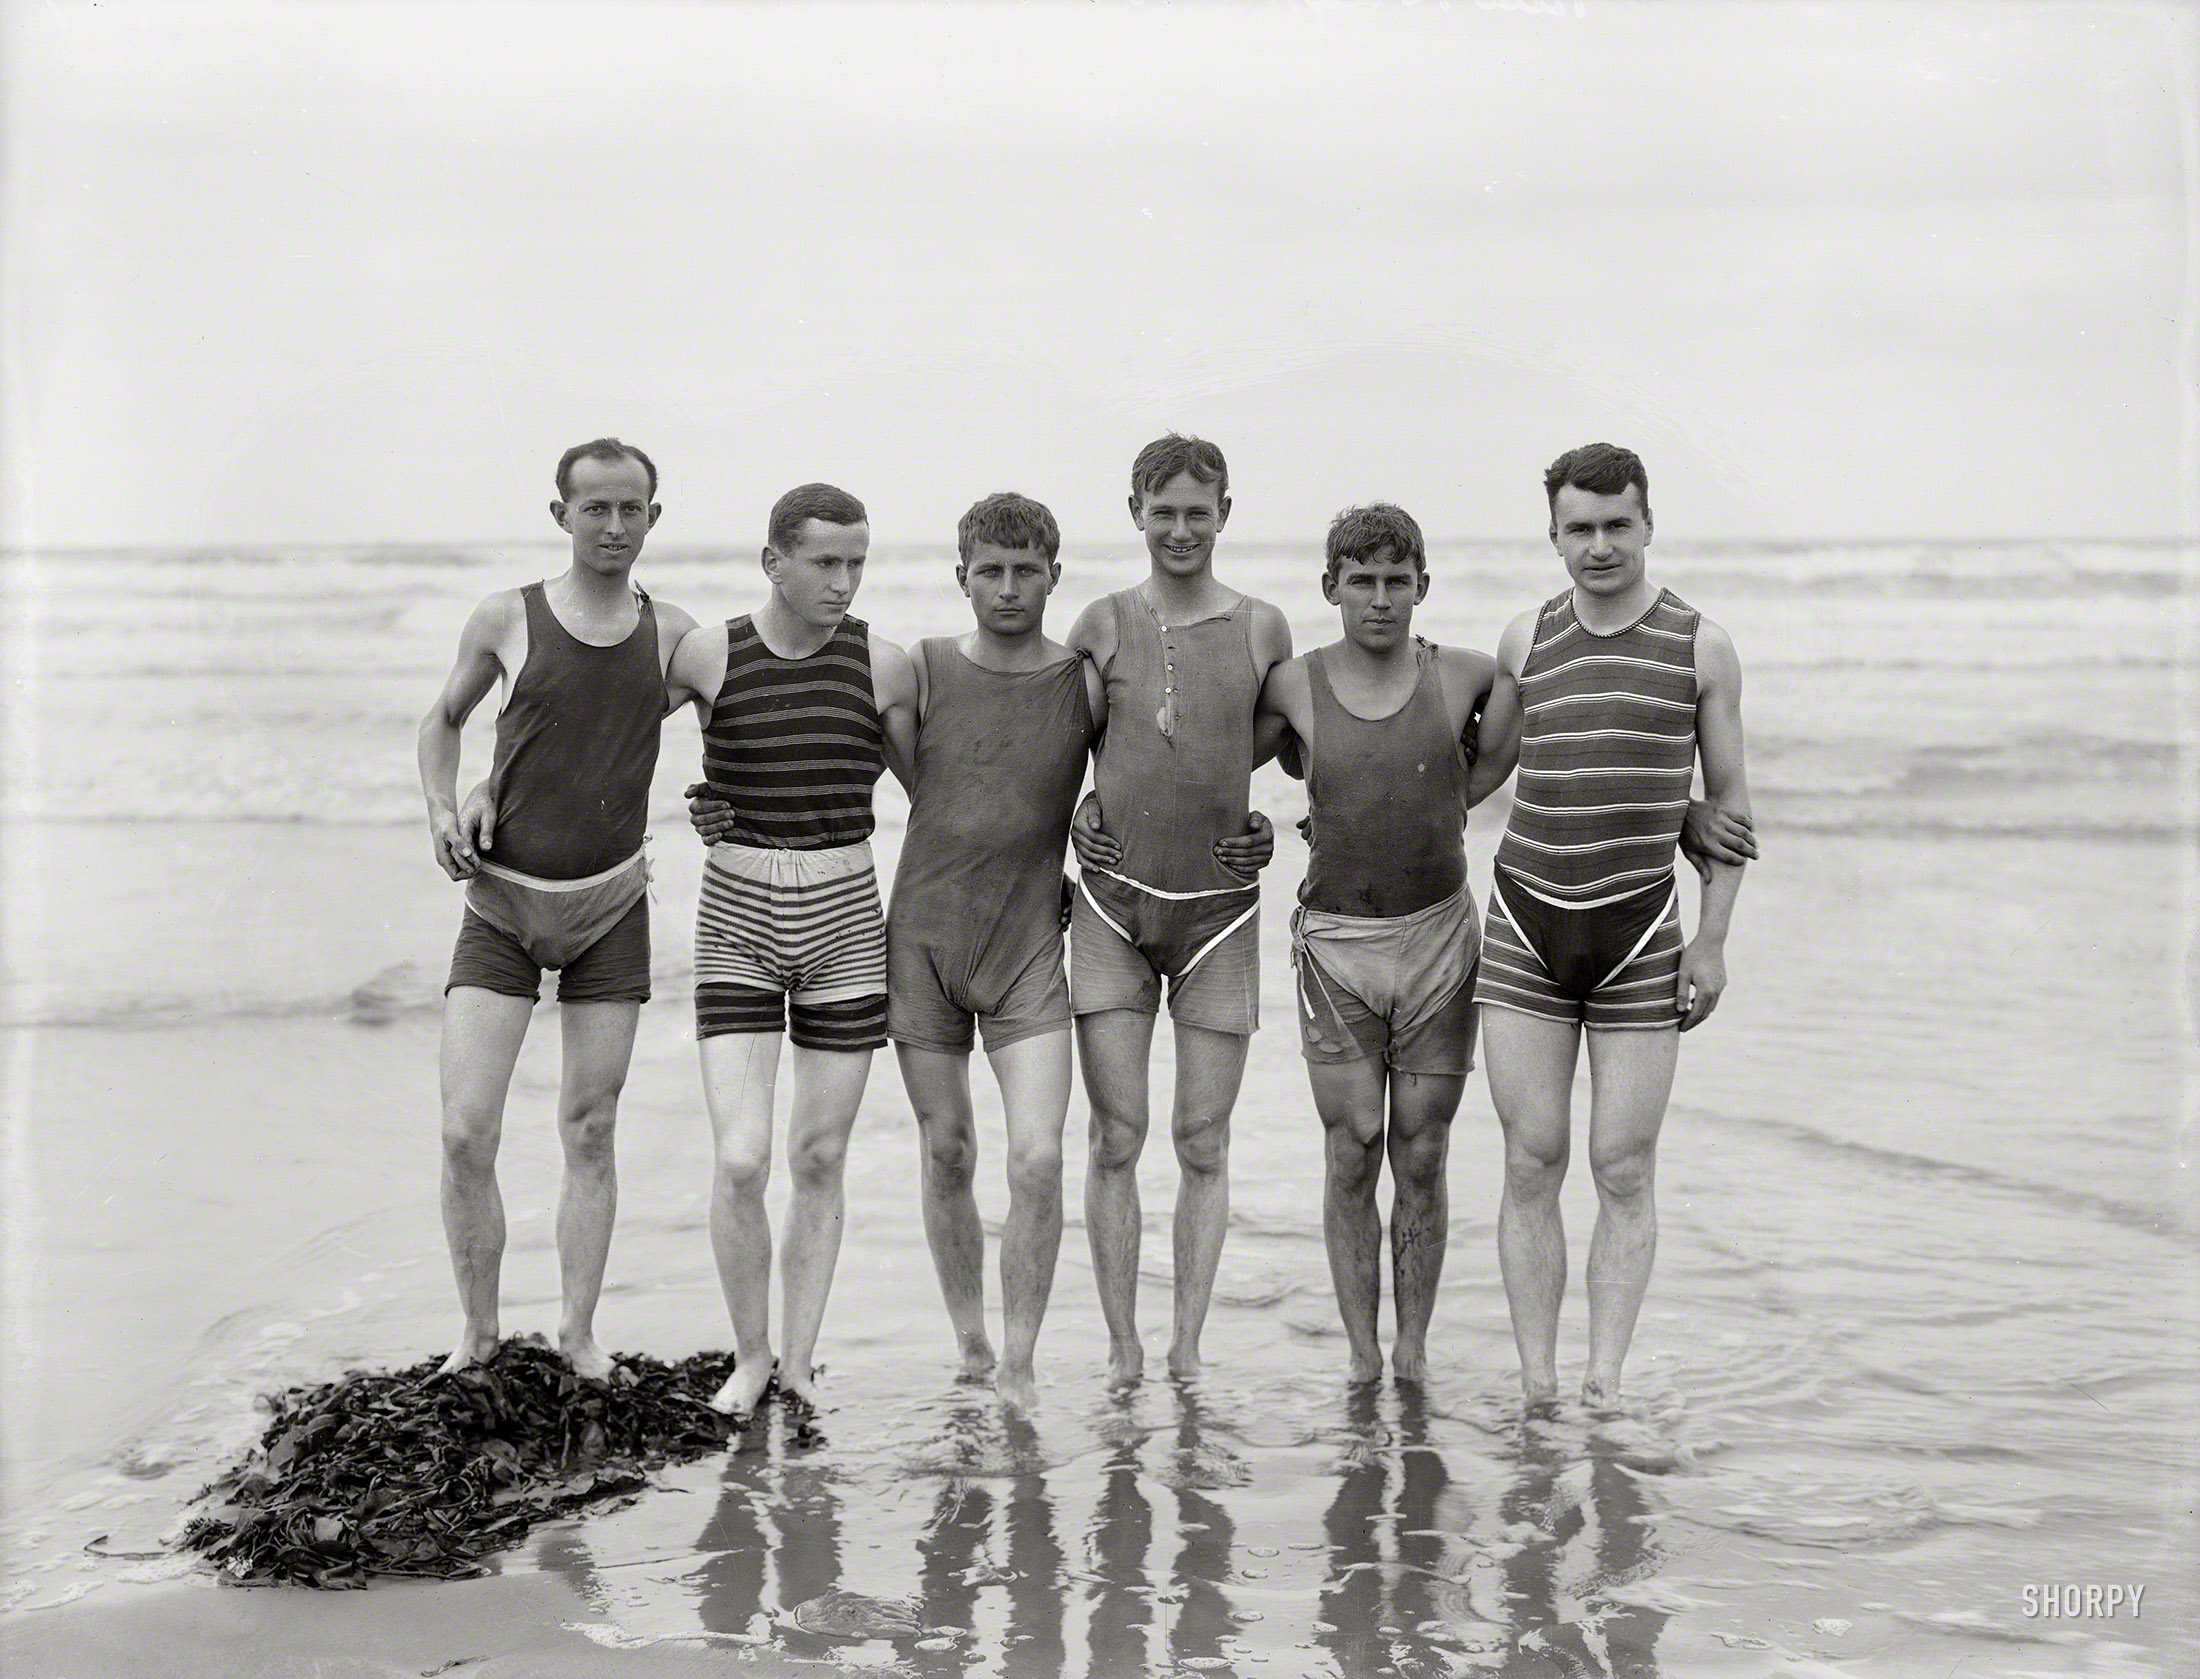 By 1910, men's bathing costumes were sleeveless and cut off at mid-thigh. However, as required by some bylaws, many male bathers, such as this group, wore trunks over their one-piece suits.
-- Encyclopedia of New Zealand
New Zealand circa 1910. "Unidentified bathers, probably at Christchurch." Dry plate glass negative by Steffano Francis Webb. View full size.